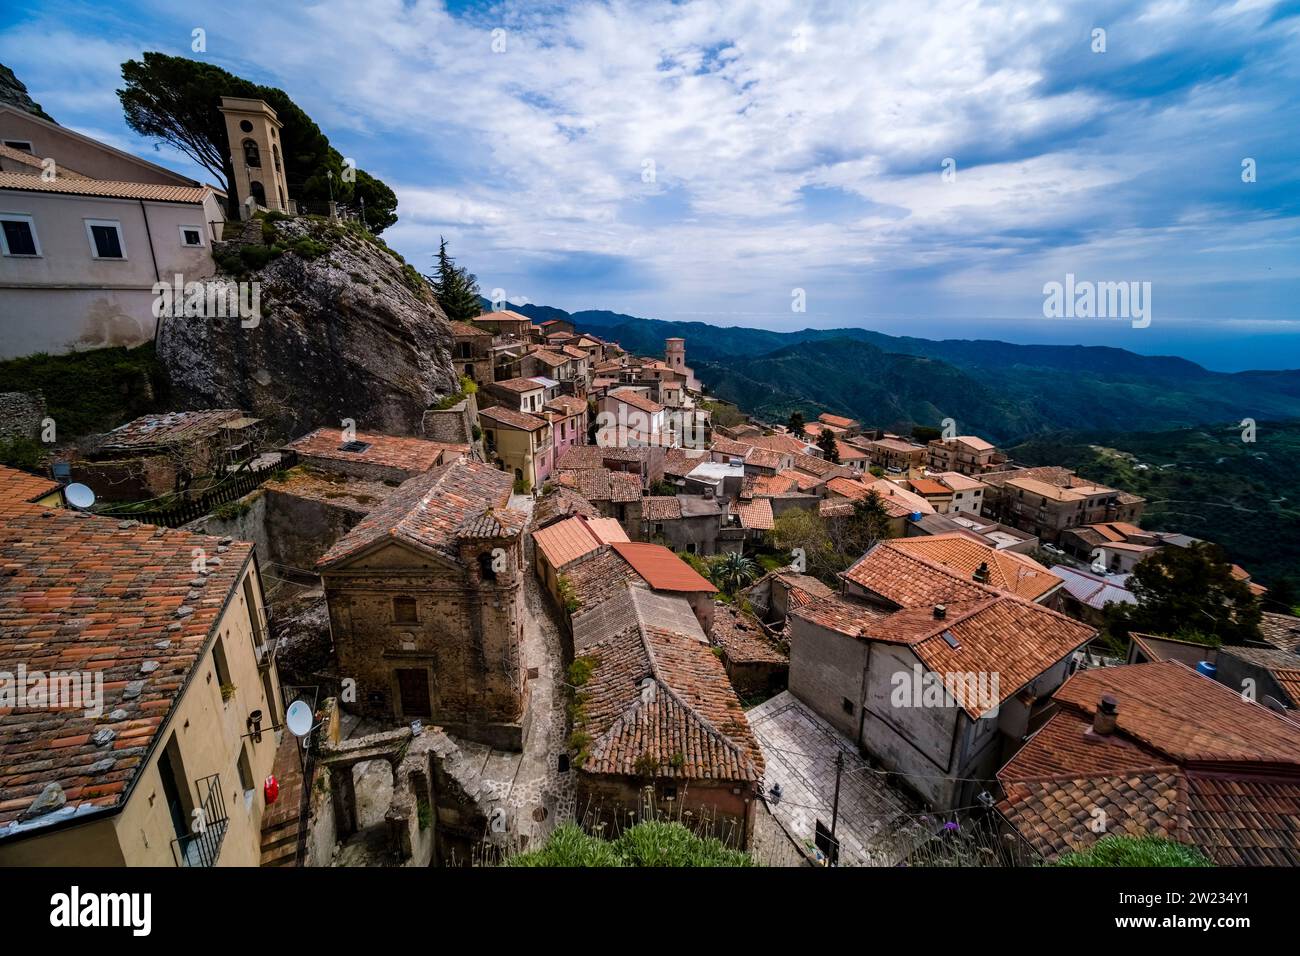 Aerial view on the roofs of the small town of Bova, situated on top of a wooded hill. Stock Photo